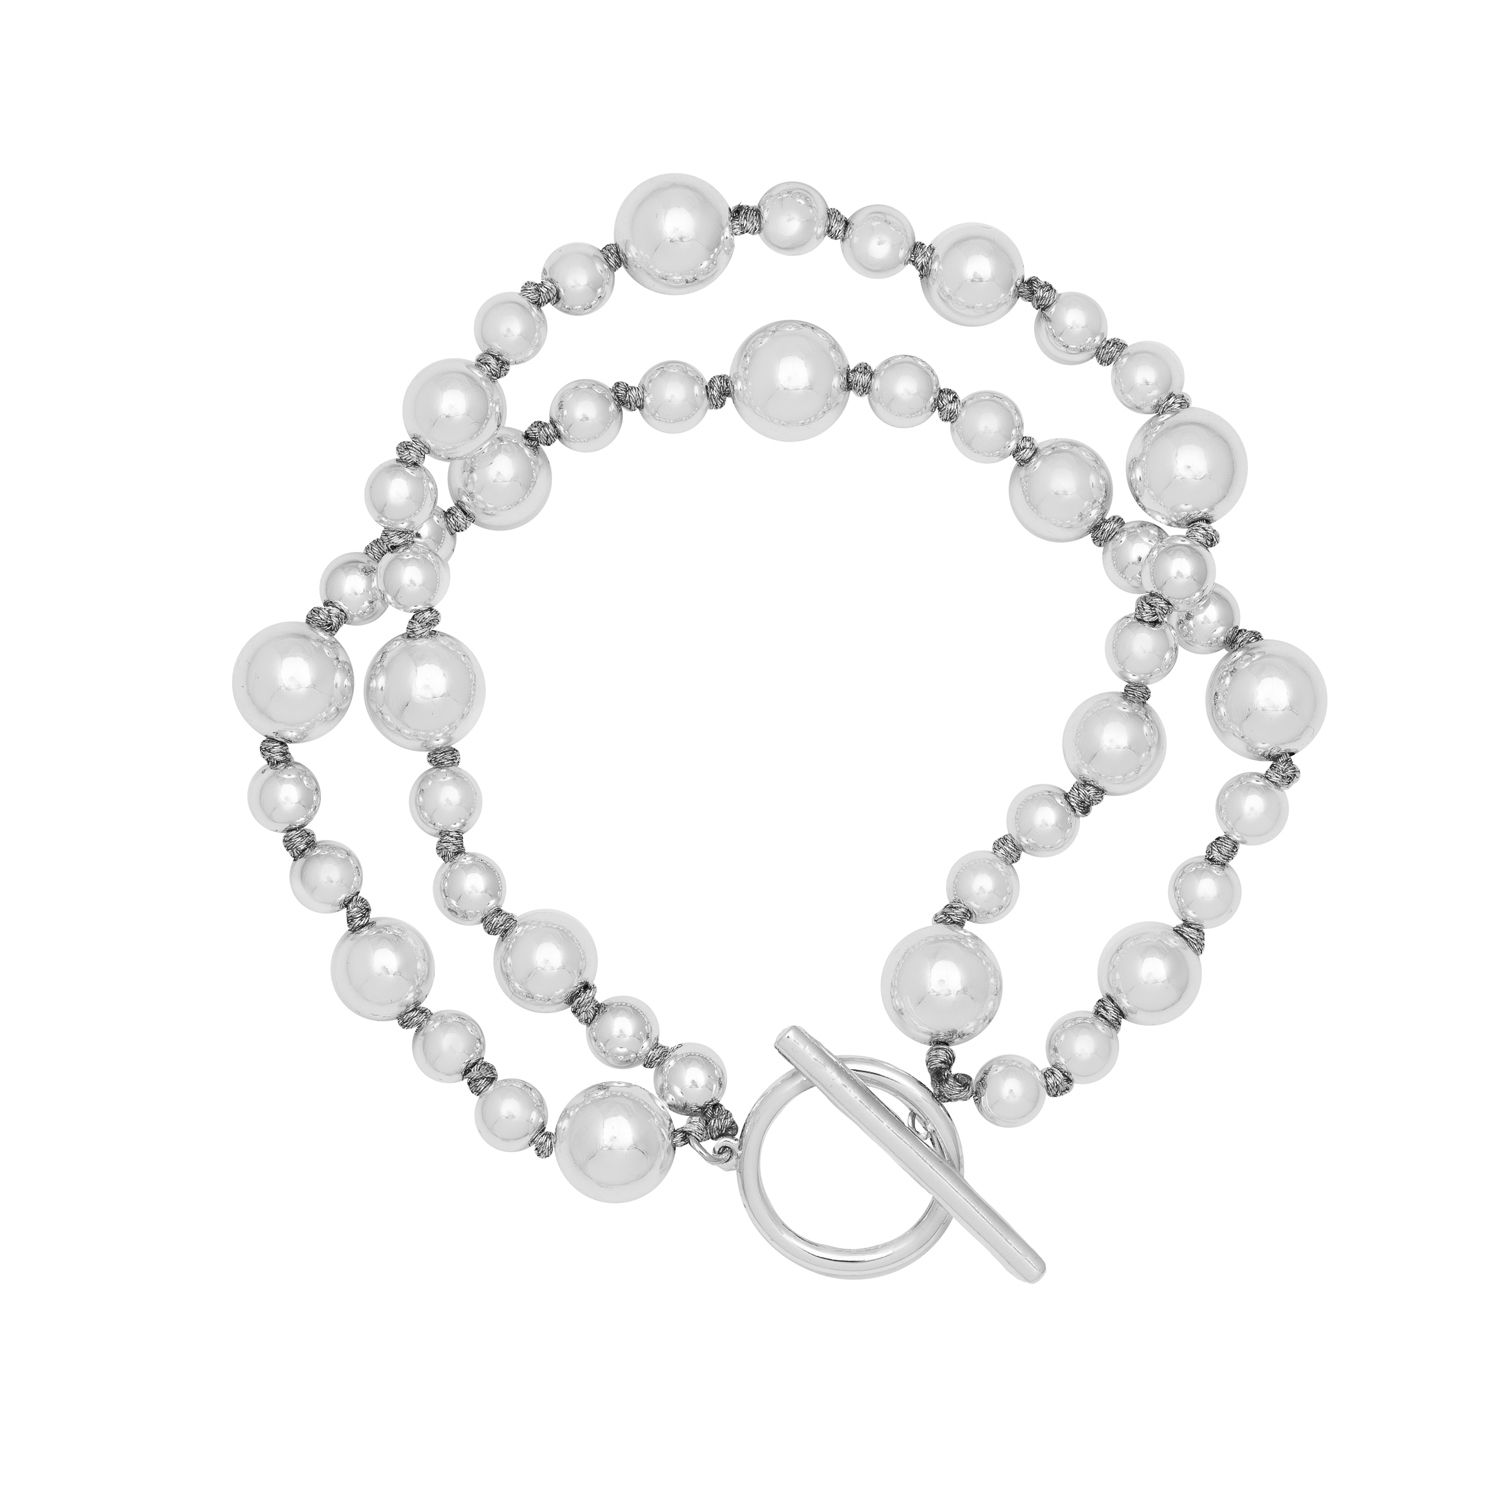 Our Silver plated Artisan Ball bracelet is simple and glamorous! An elegant silver ball bracelet comprising of two layers of shiny balls that will adds a touch of glamour to your look. Pair with the matching necklace and earrings for a complete set. Measuring 19.5cm in length with a modern hoop and bar fastening.